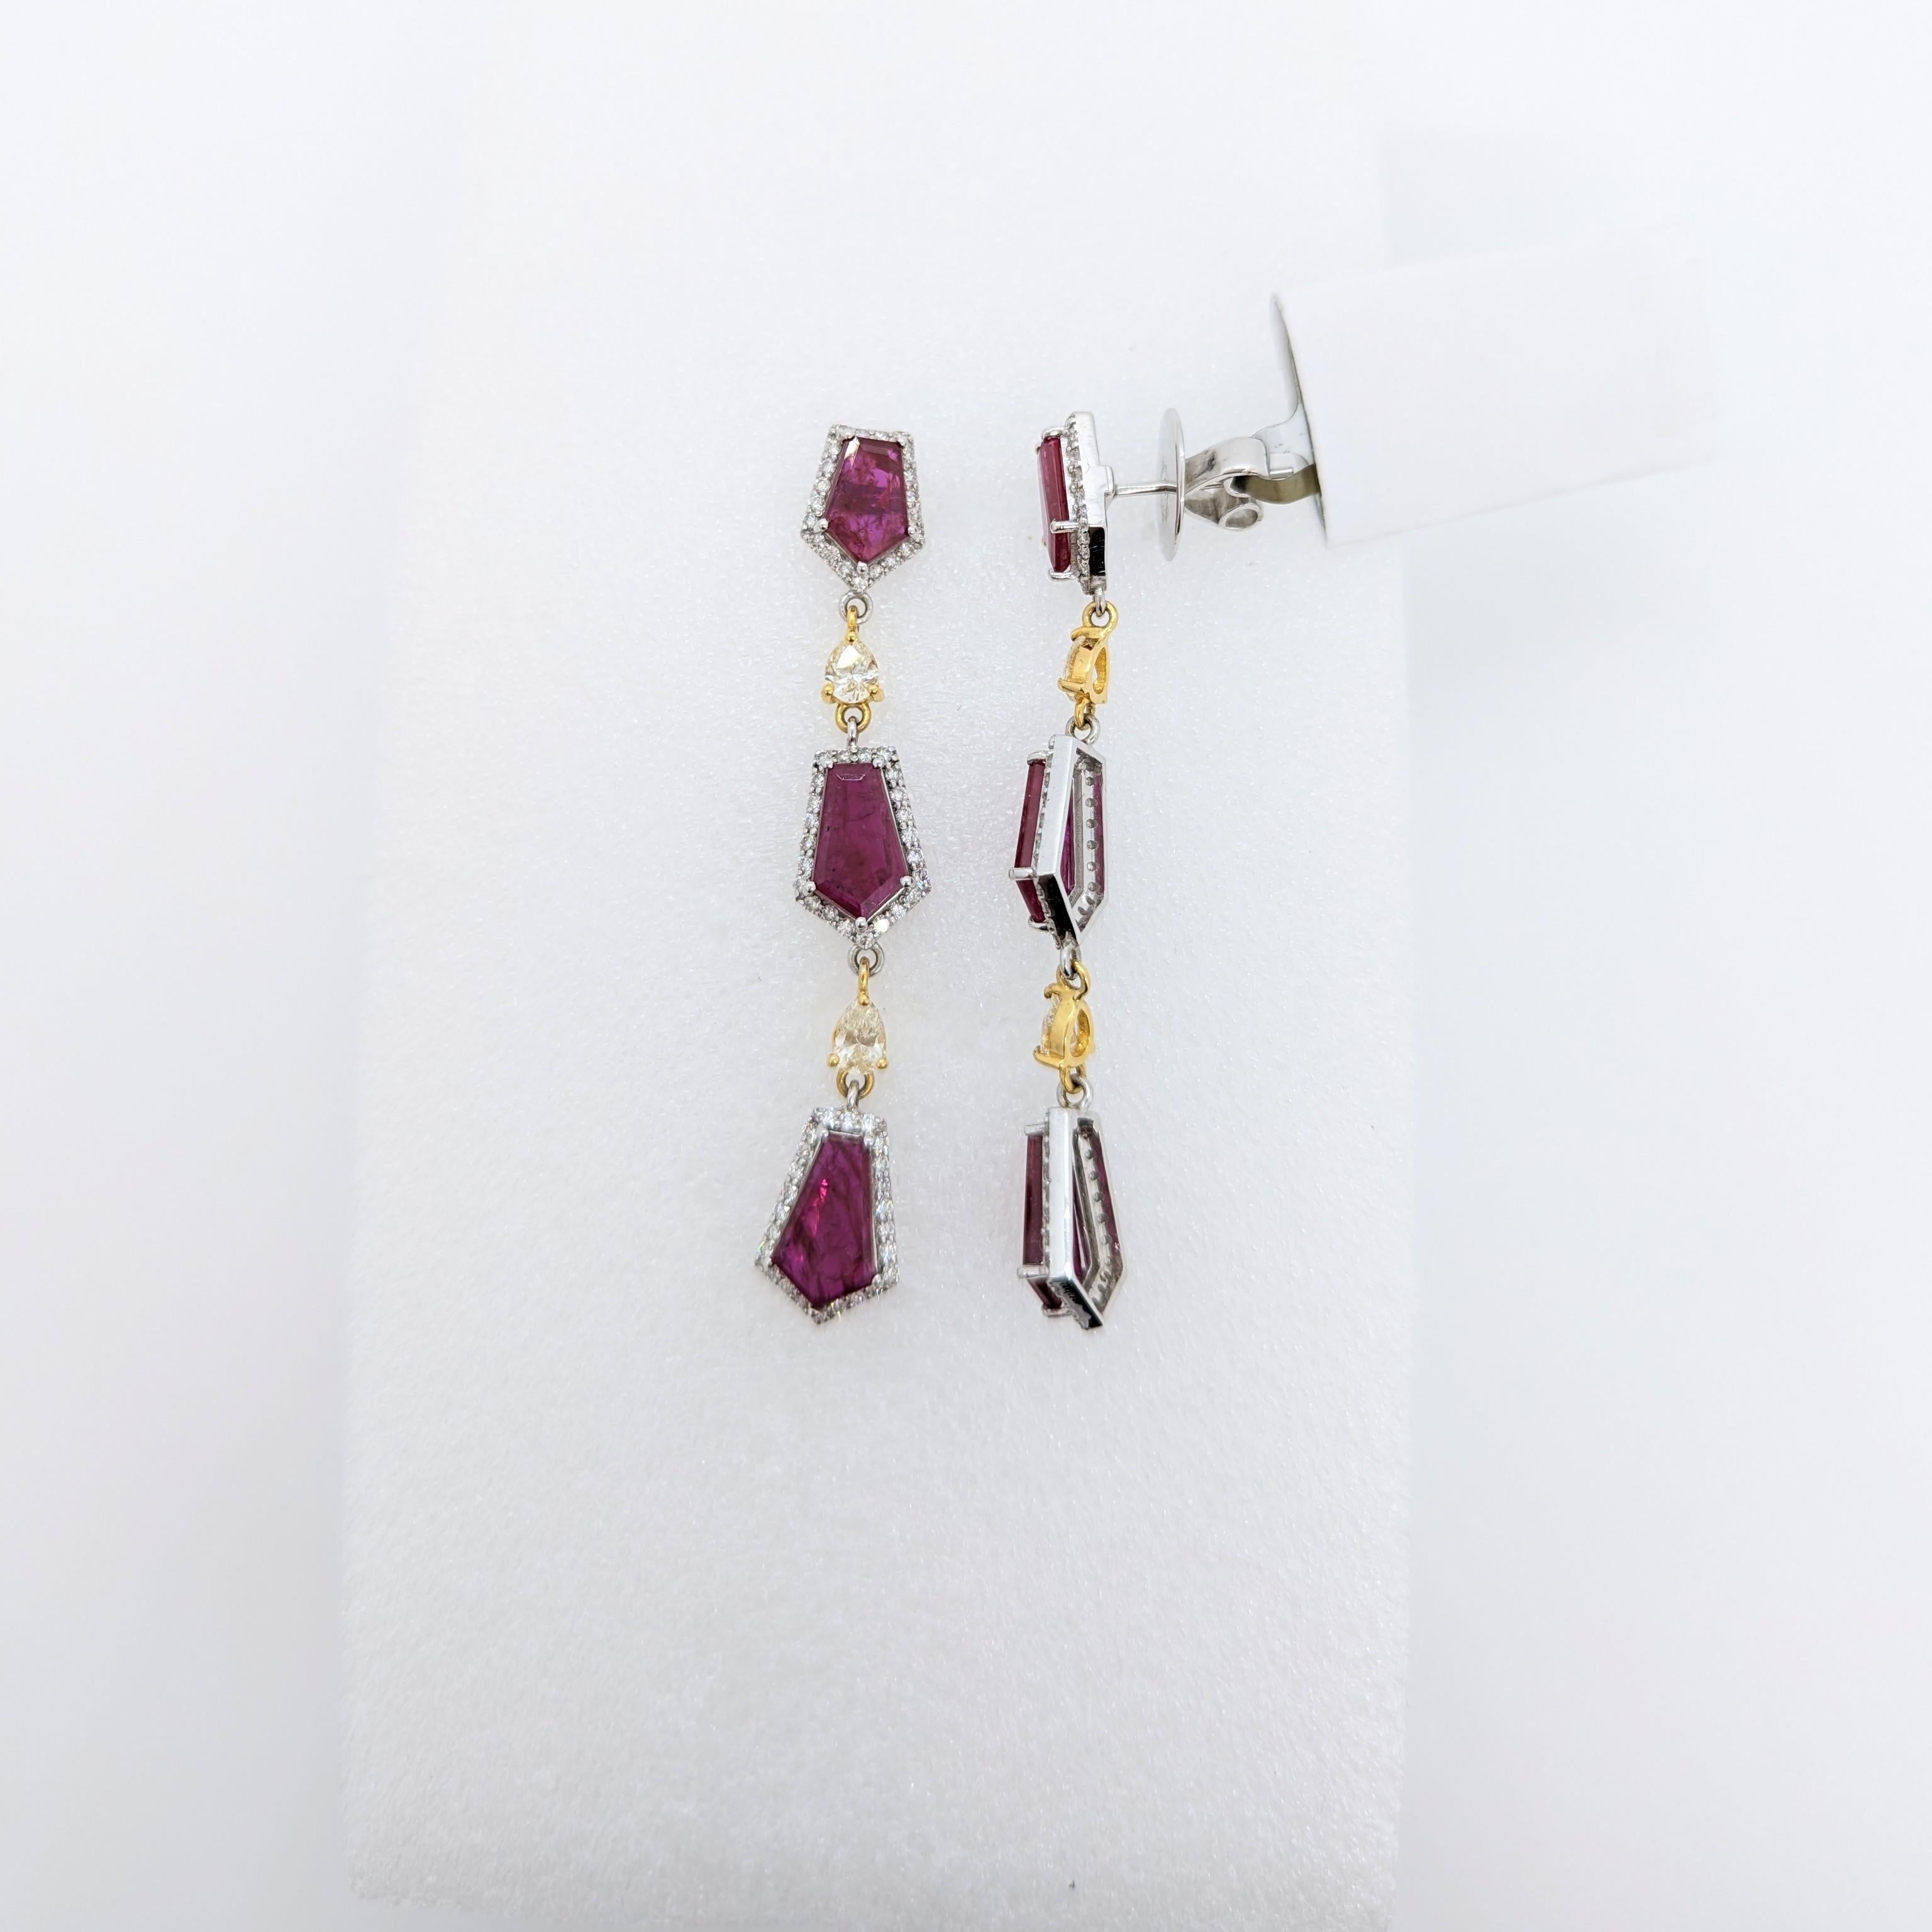 GIA Unheated Purplish Red Ruby and White Diamond Dangle Earrings in 18K In New Condition For Sale In Los Angeles, CA